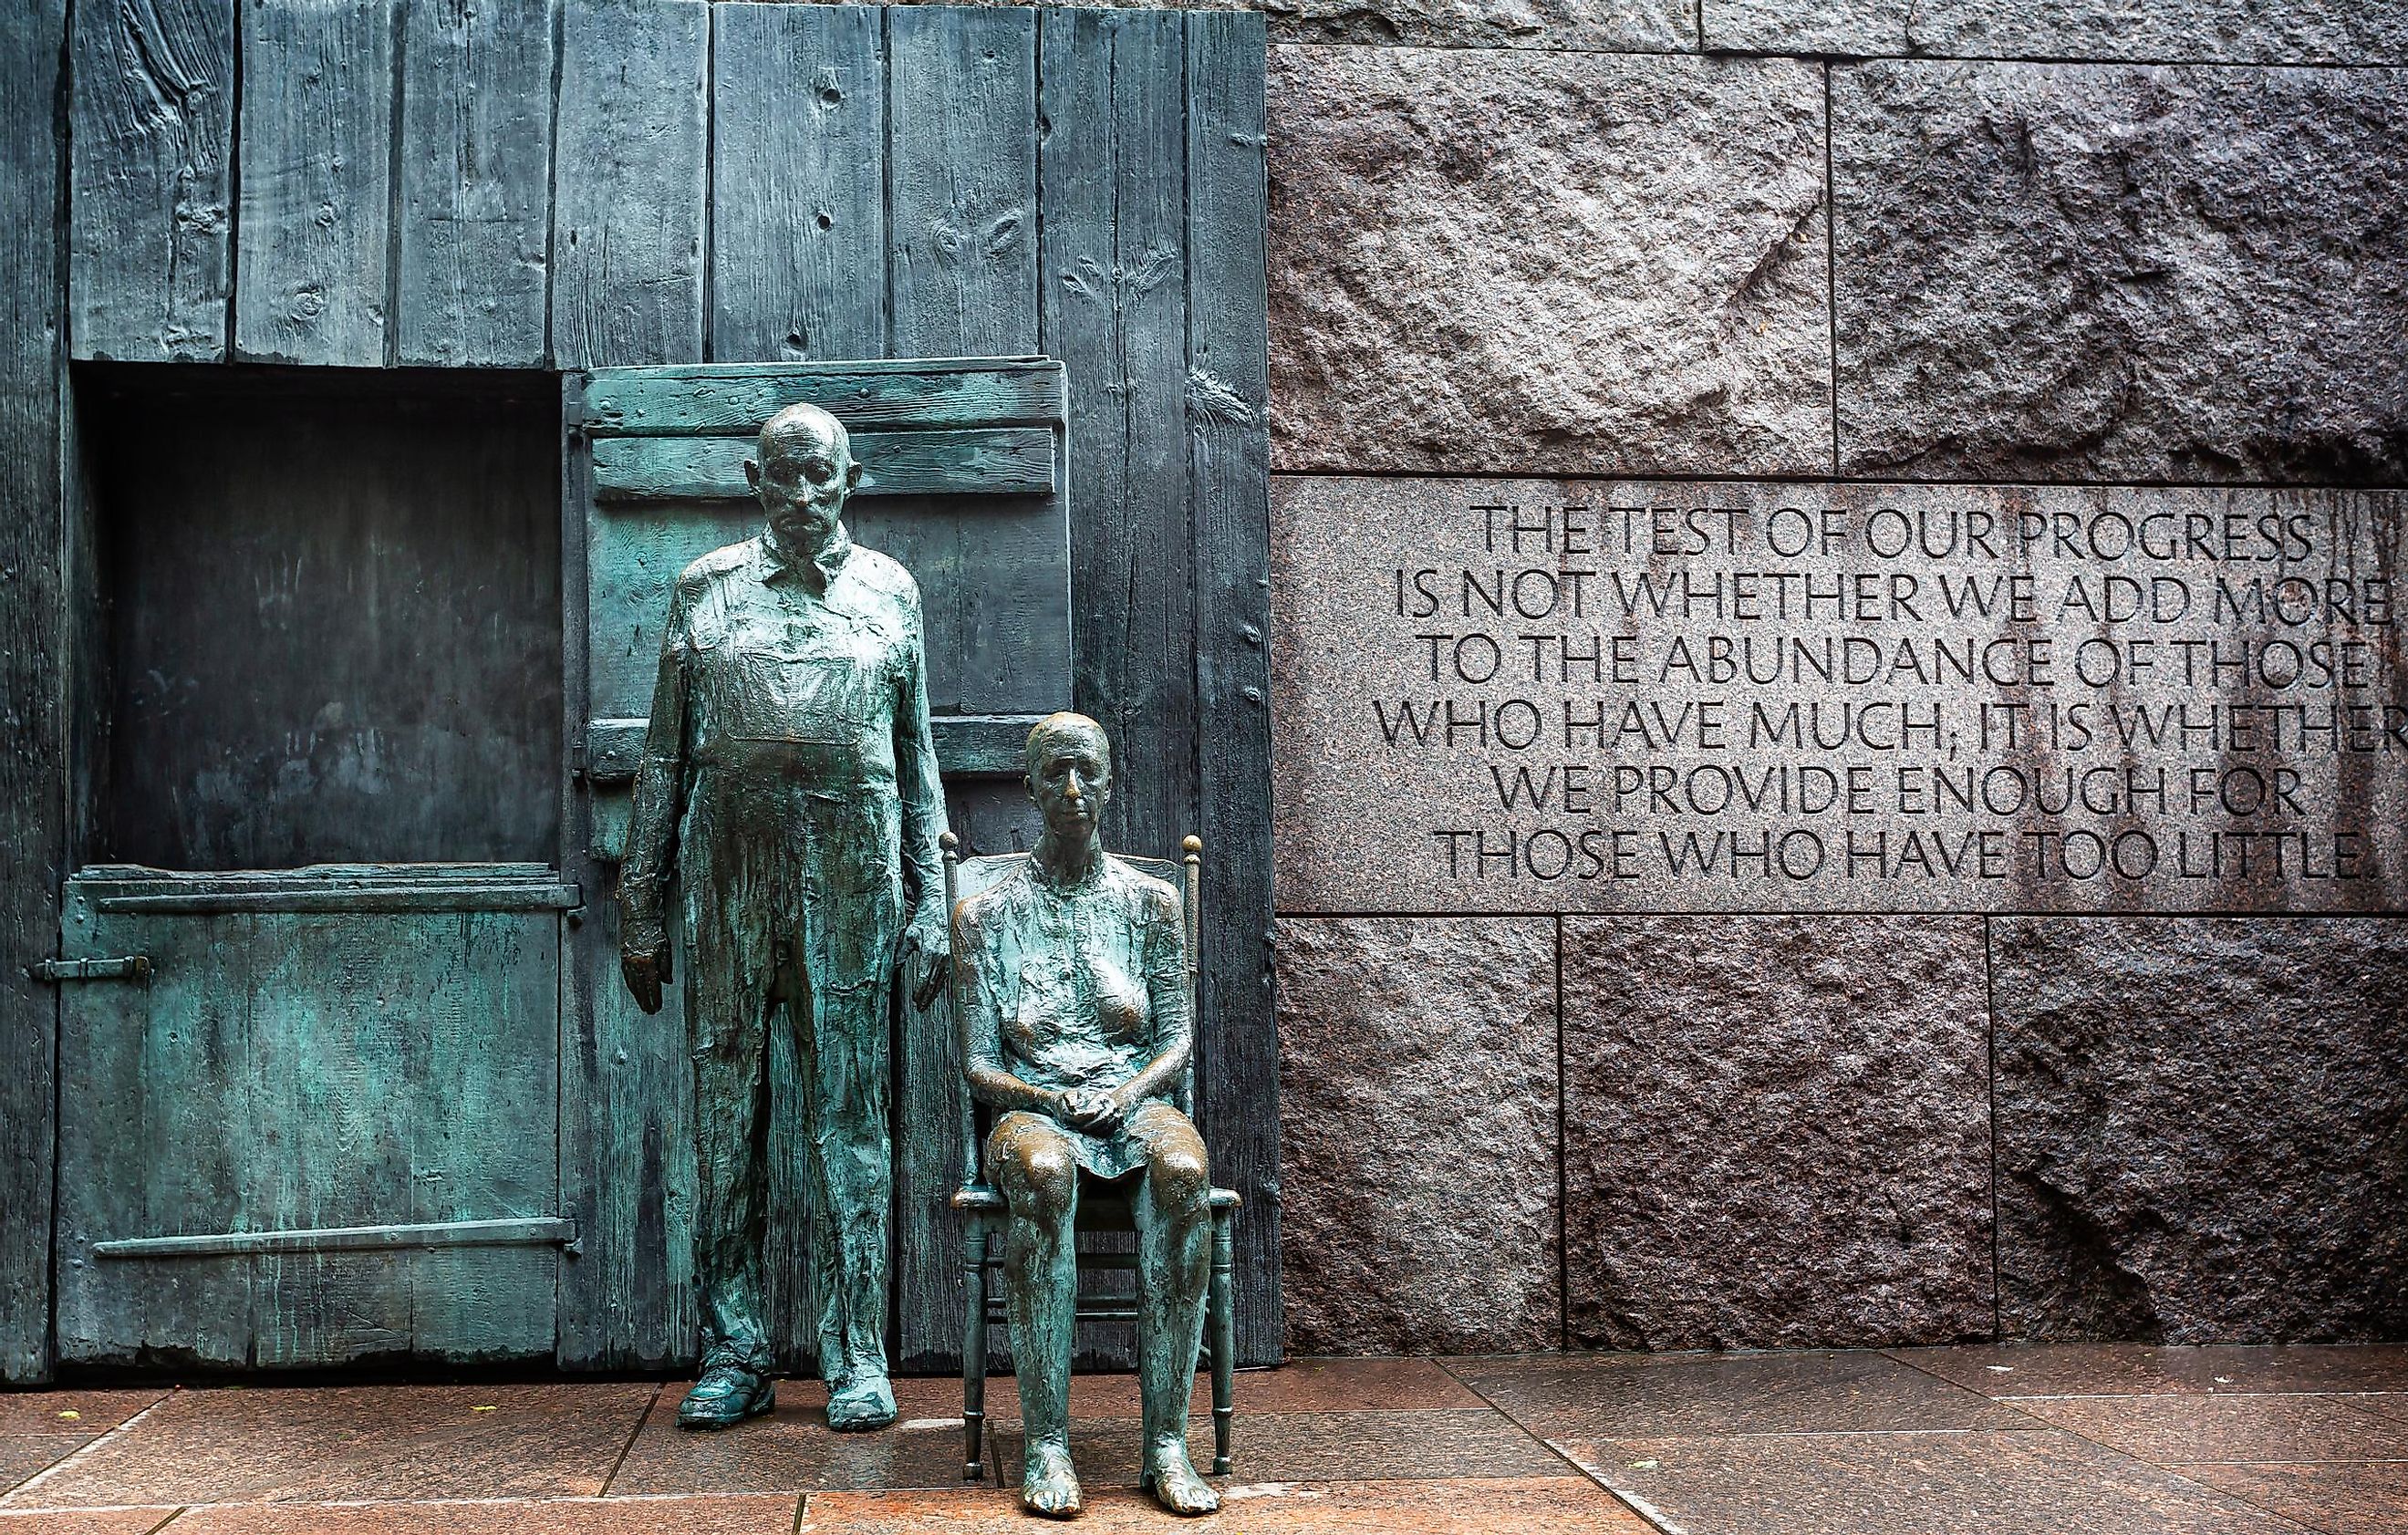 Statues depicting the Great Depression in the 1930s in The Franklin Roosevelt Memorial in Washington DC, USA.